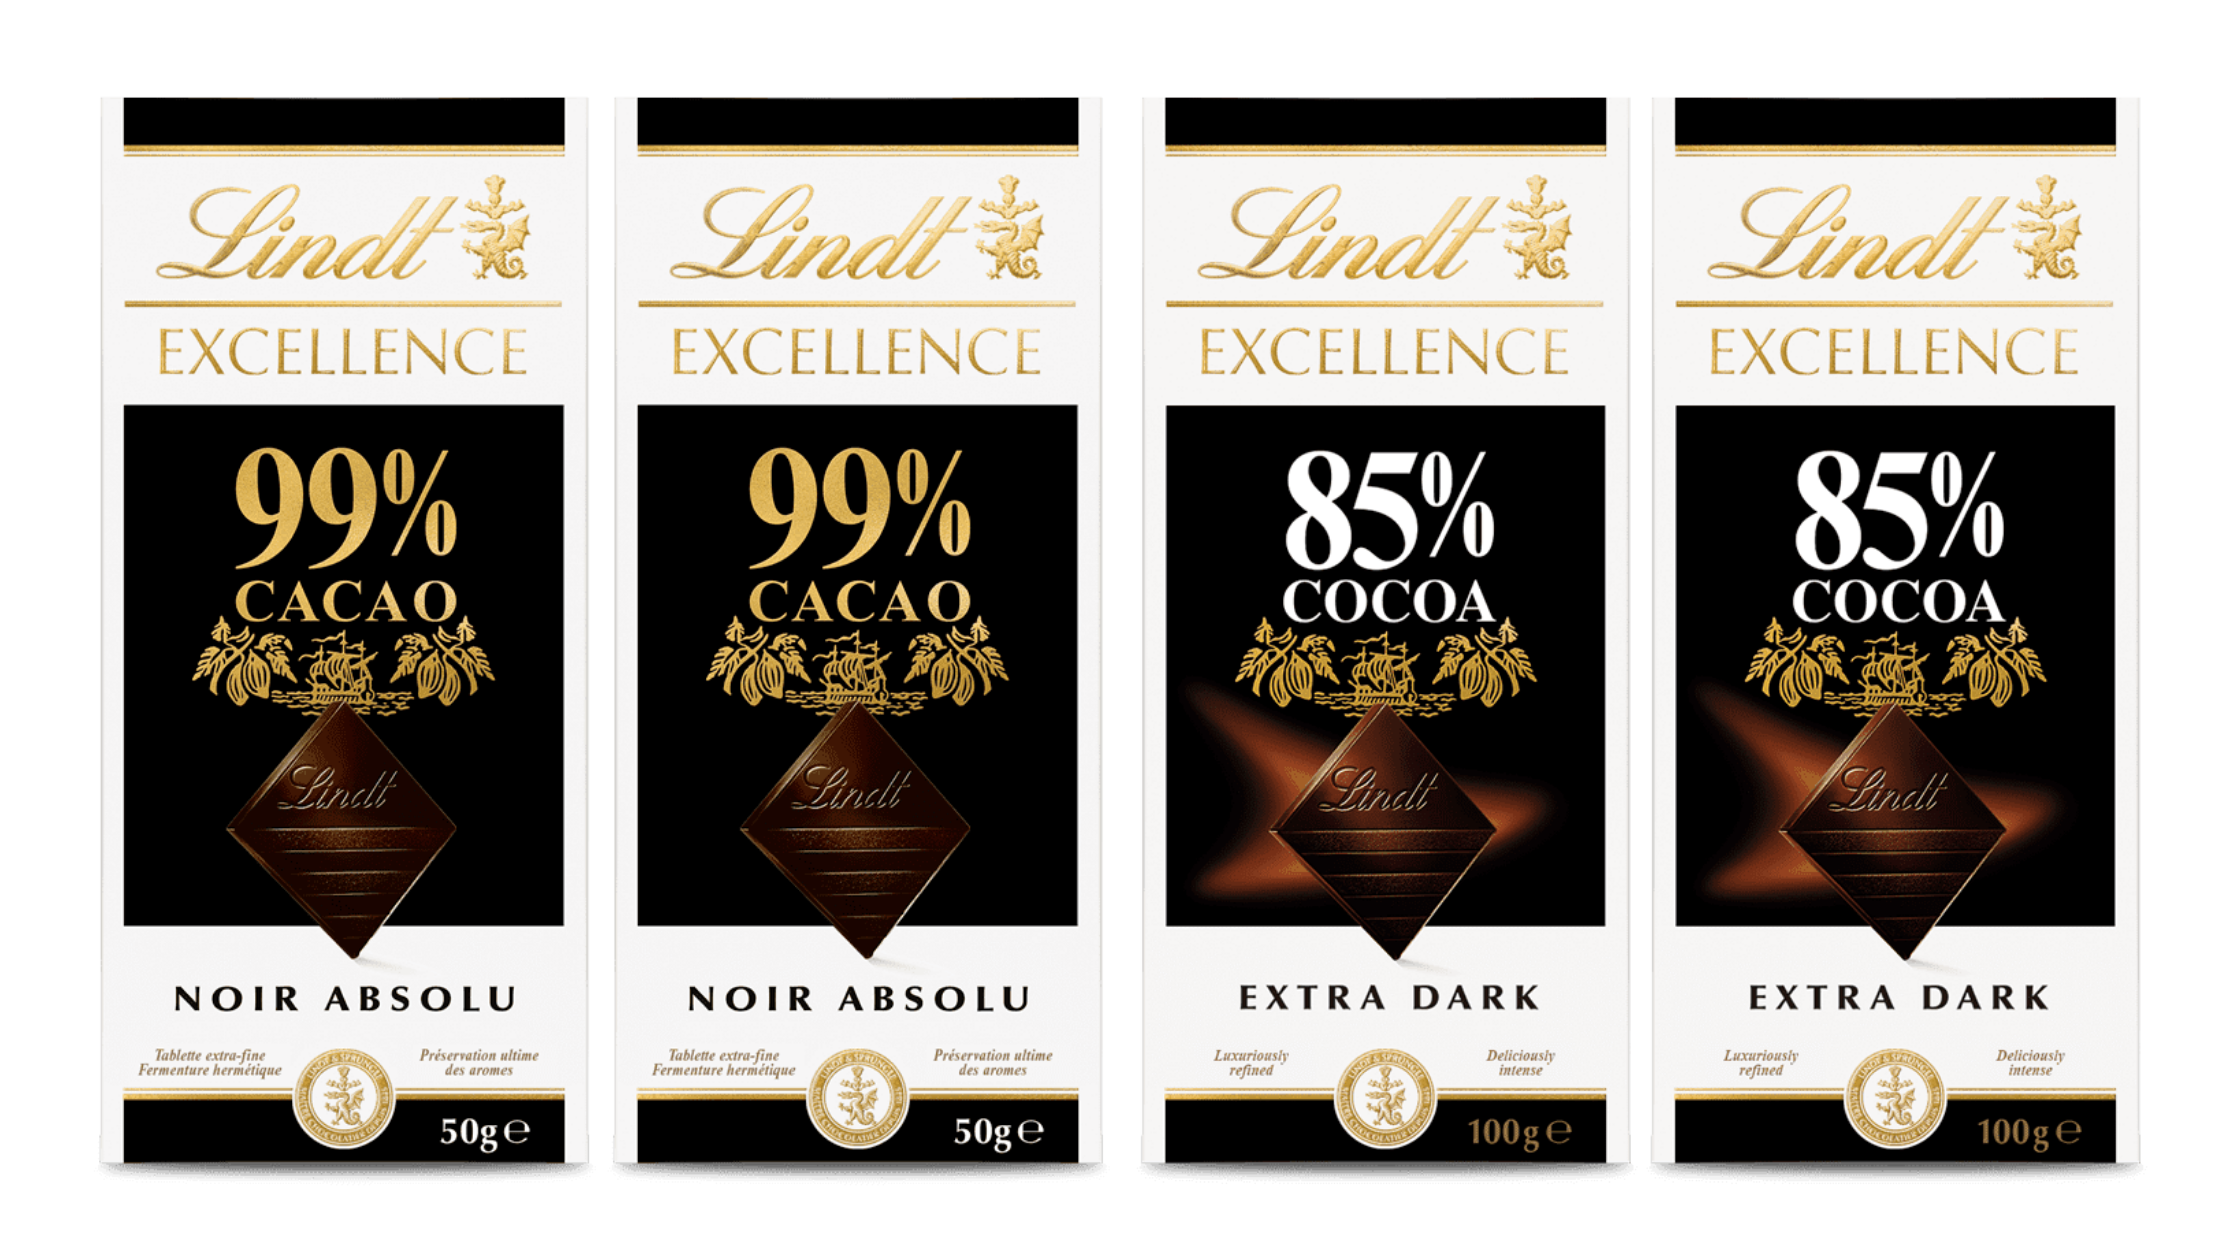 Vegan or Not? The Ultimate Guide to Lindt Chocolate